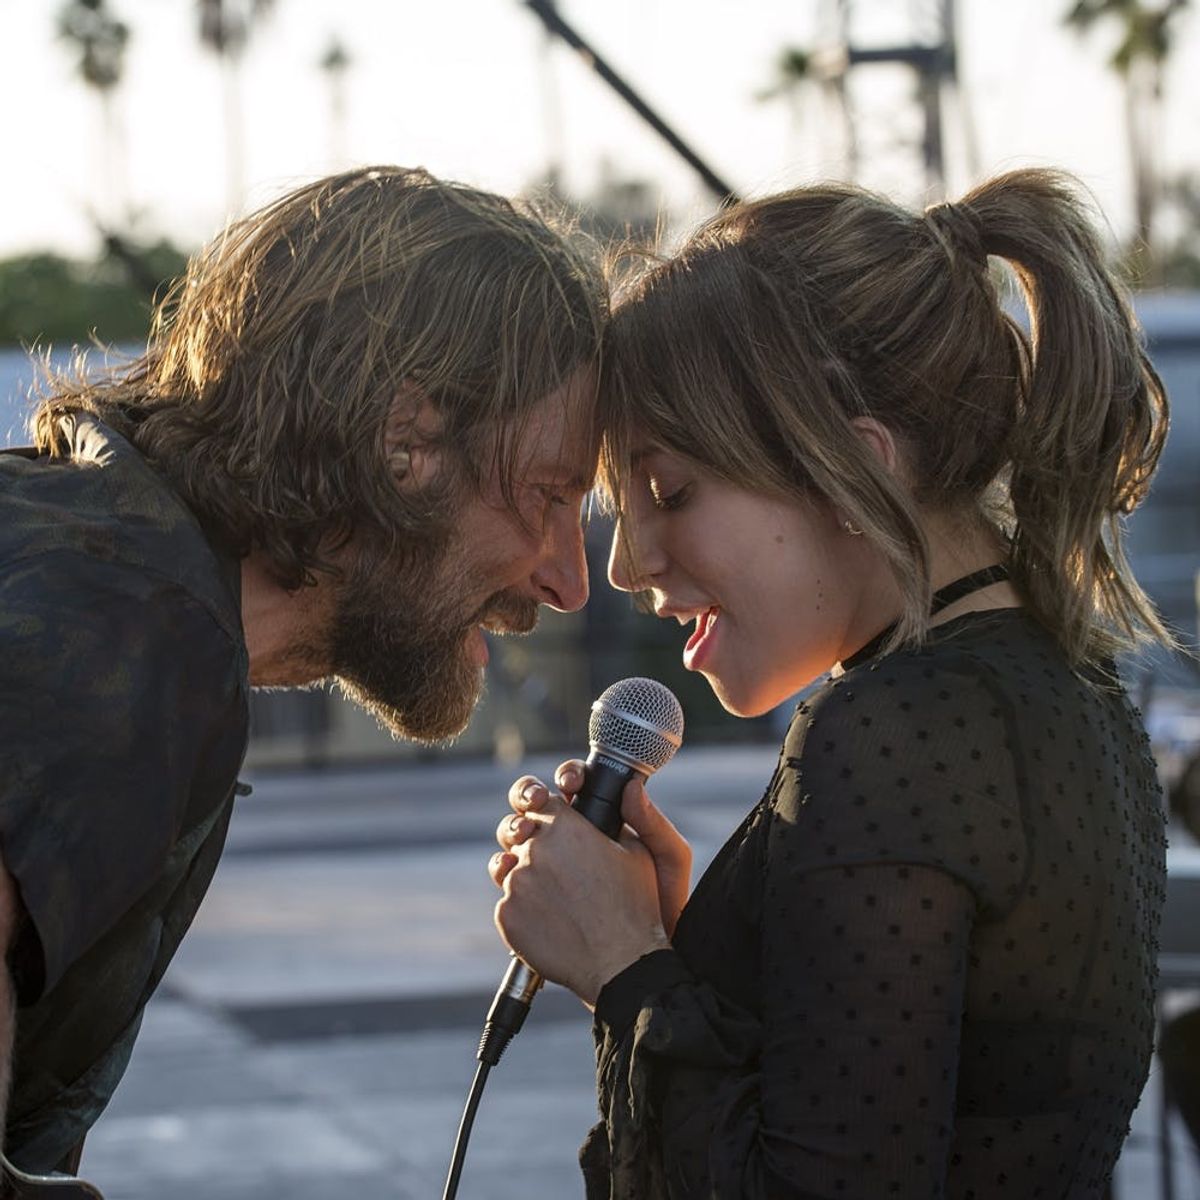 The First Official Trailer for ‘A Star Is Born’ Will Leave You Wanting More